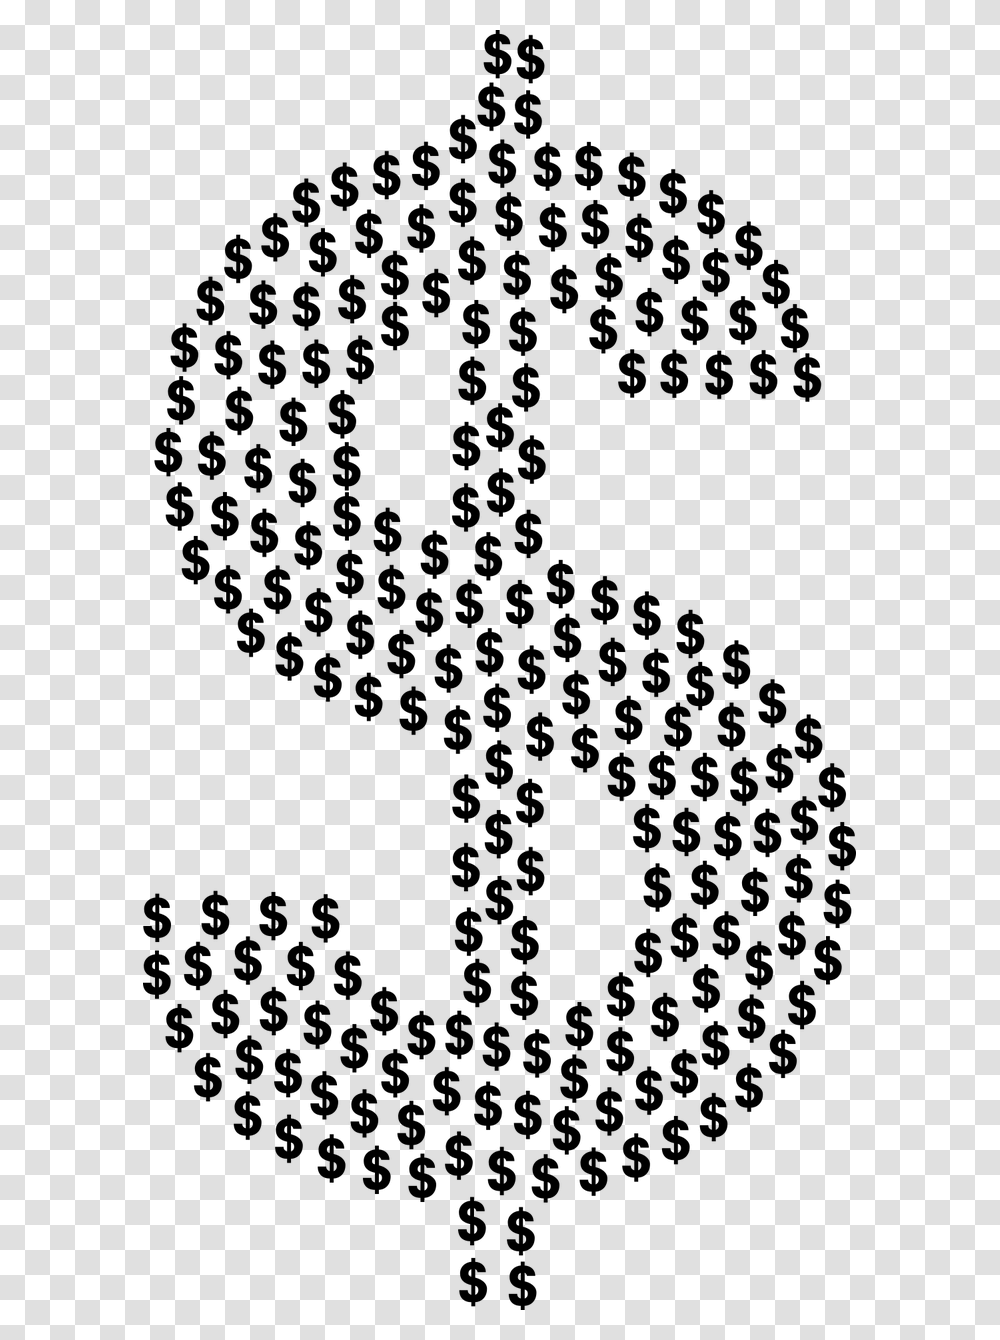 Dollar Sign Fractal Money Image Behind The Scenes Shadowhunters, Gray, World Of Warcraft Transparent Png